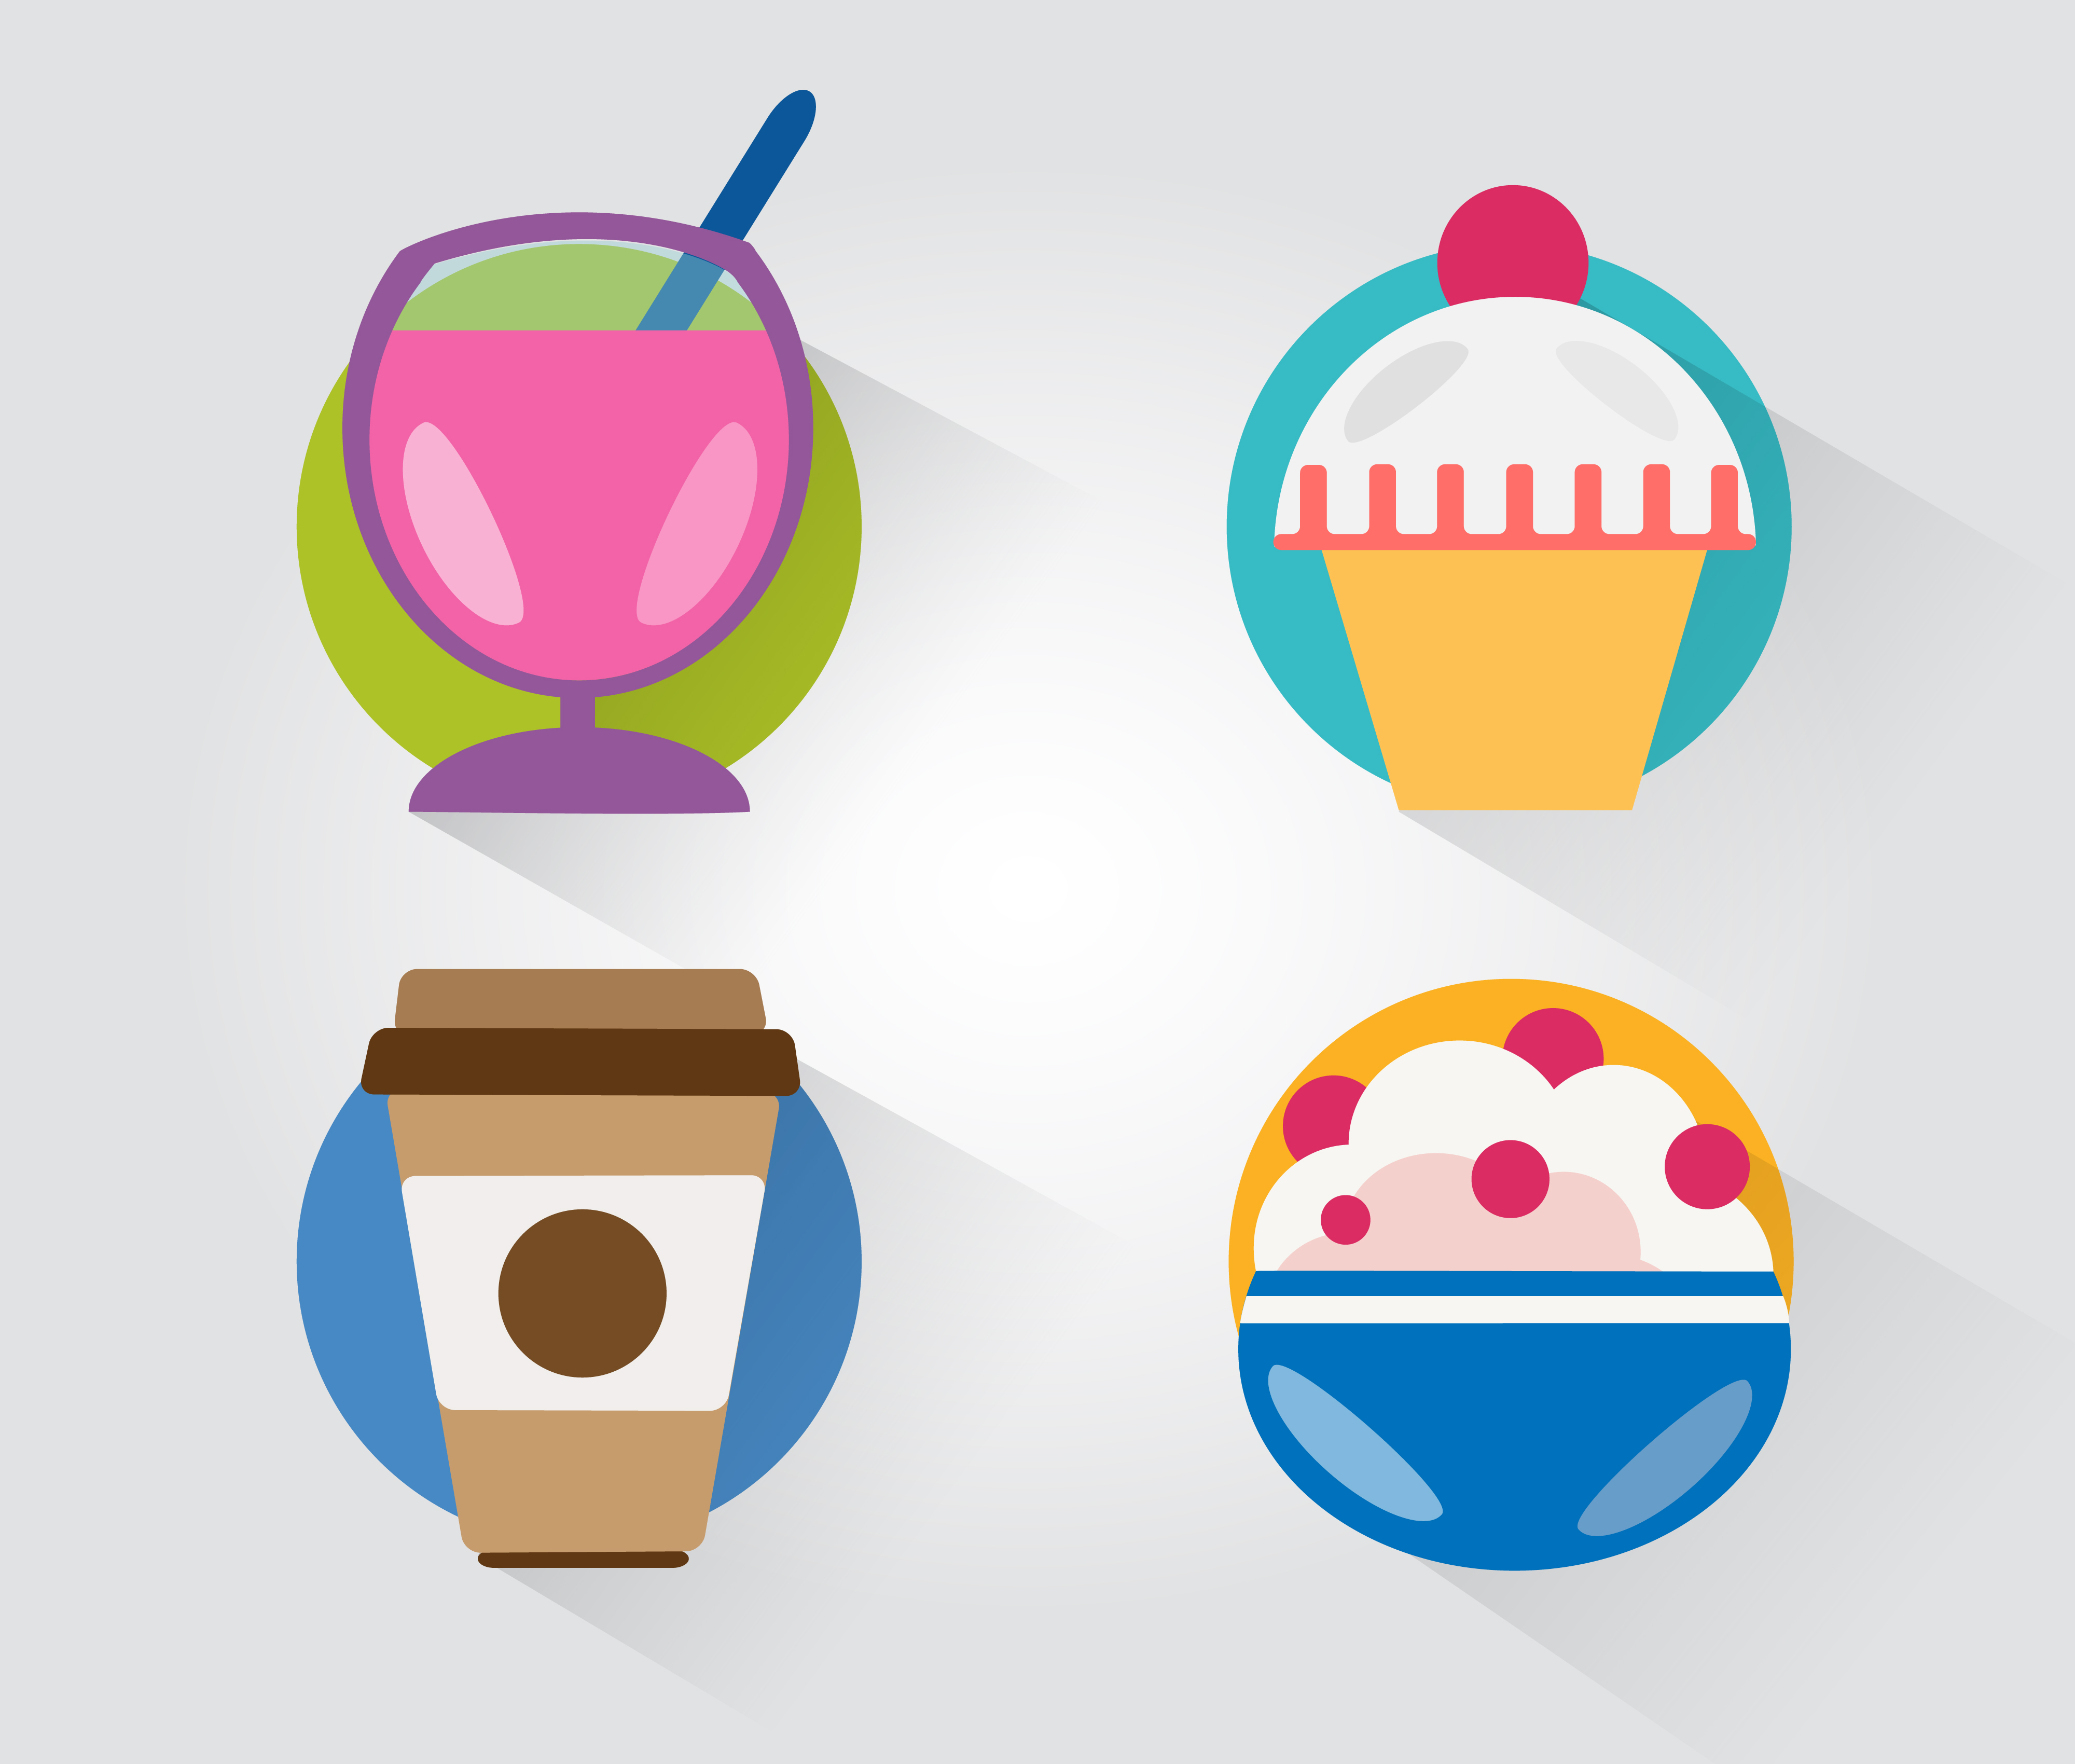 Food objects for design. Vector illustrations Photoshop brush